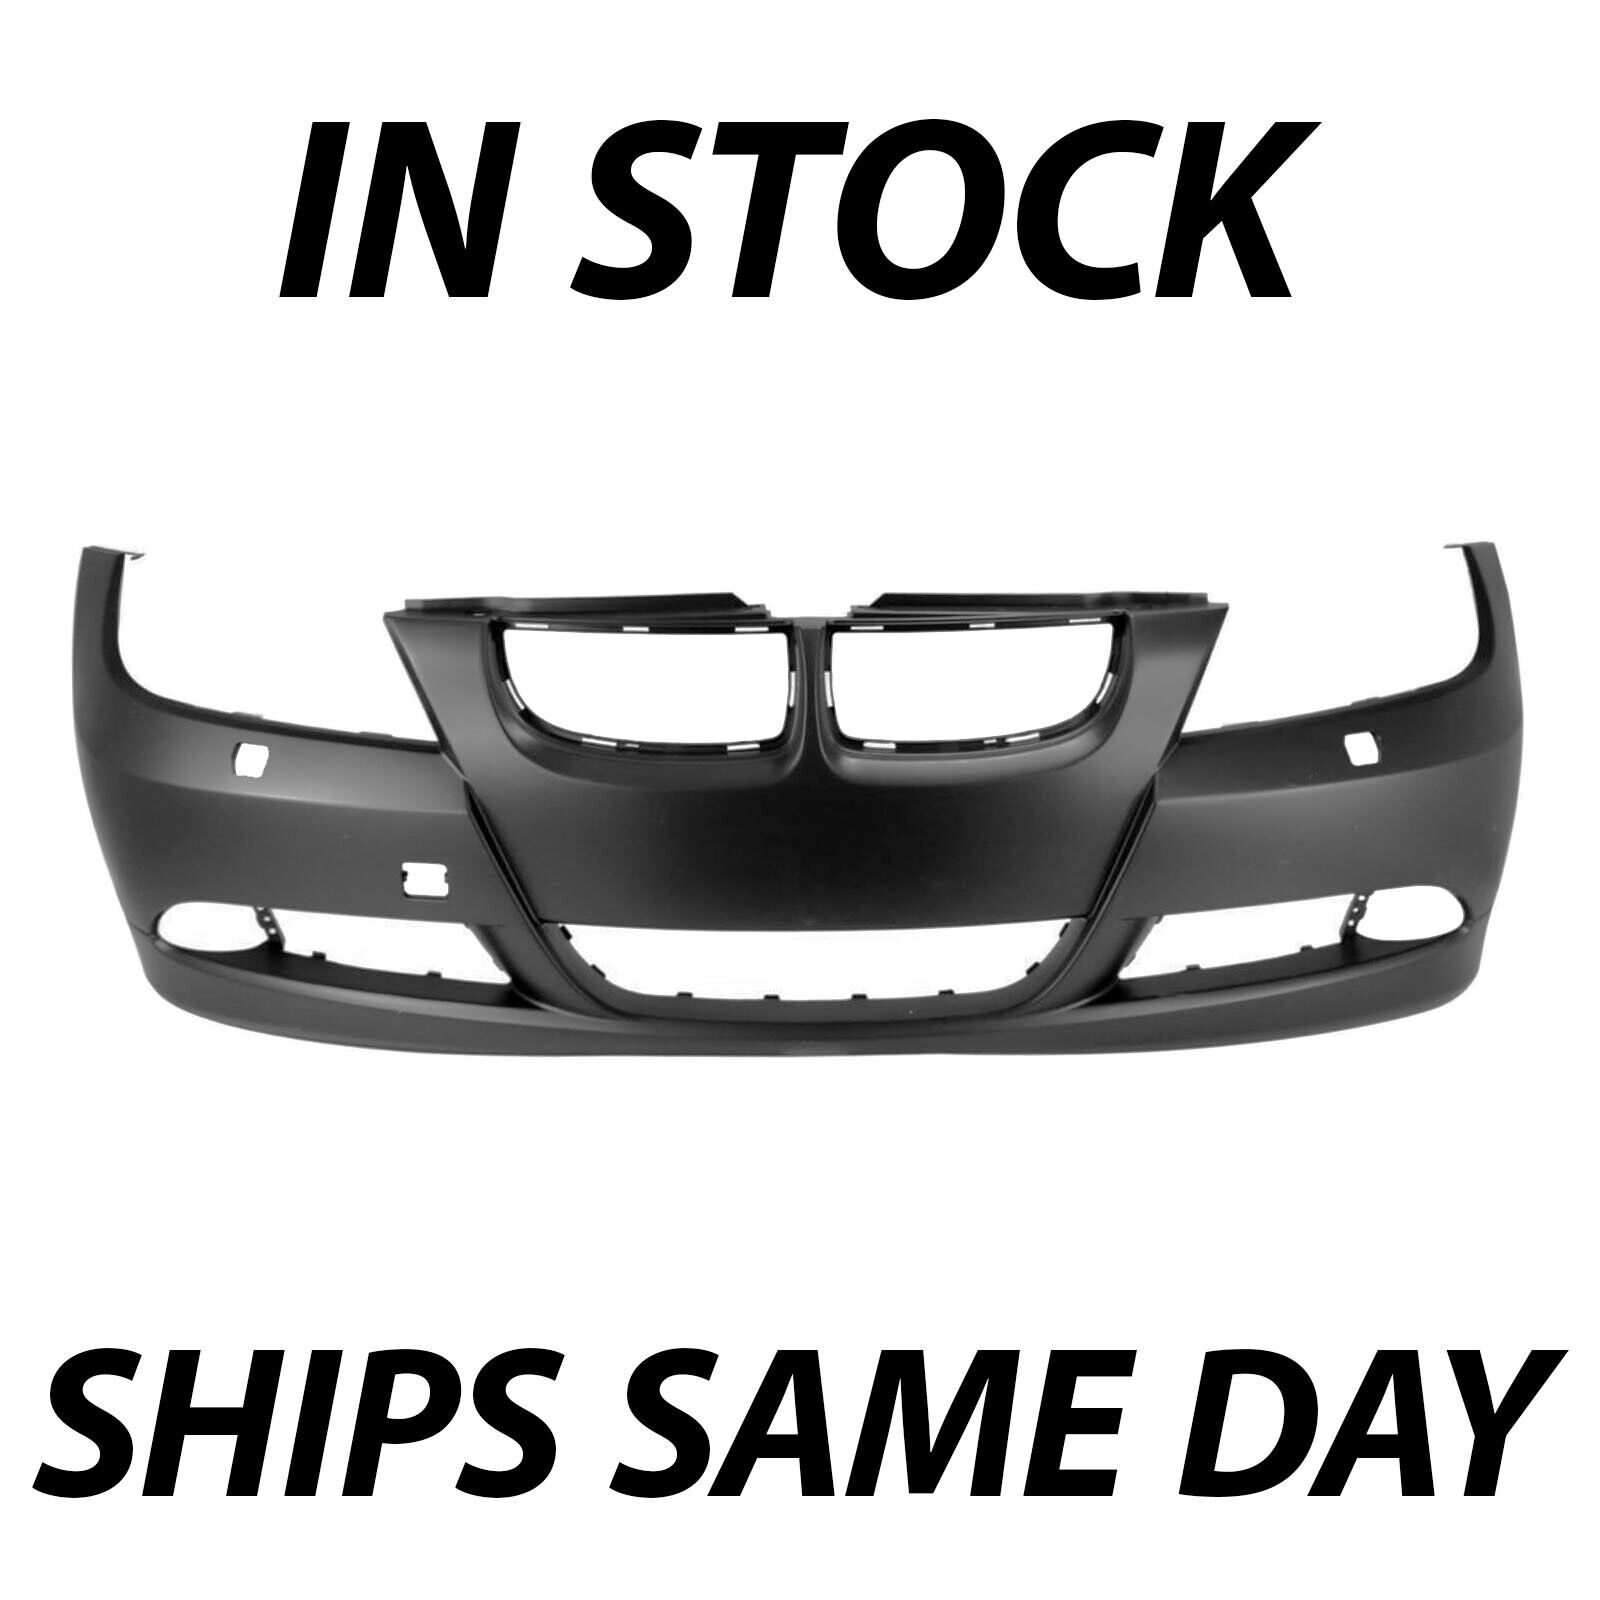 NEW Primered Front Bumper Cover for 2006 2007 2008 BMW 325 328 330 335 3 series